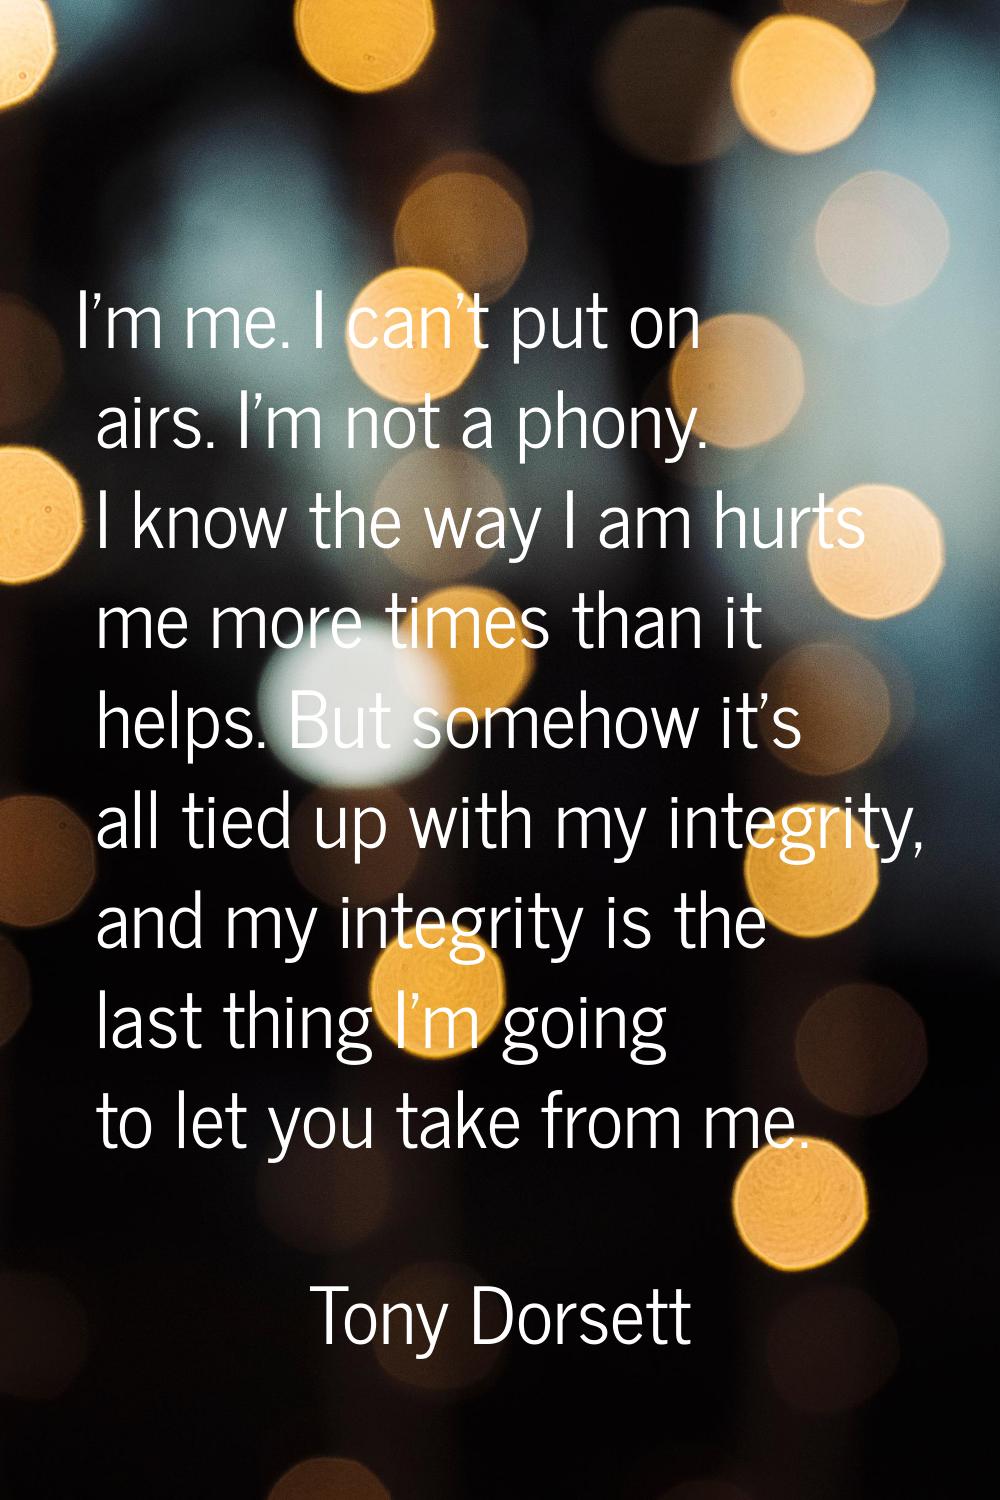 I'm me. I can't put on airs. I'm not a phony. I know the way I am hurts me more times than it helps